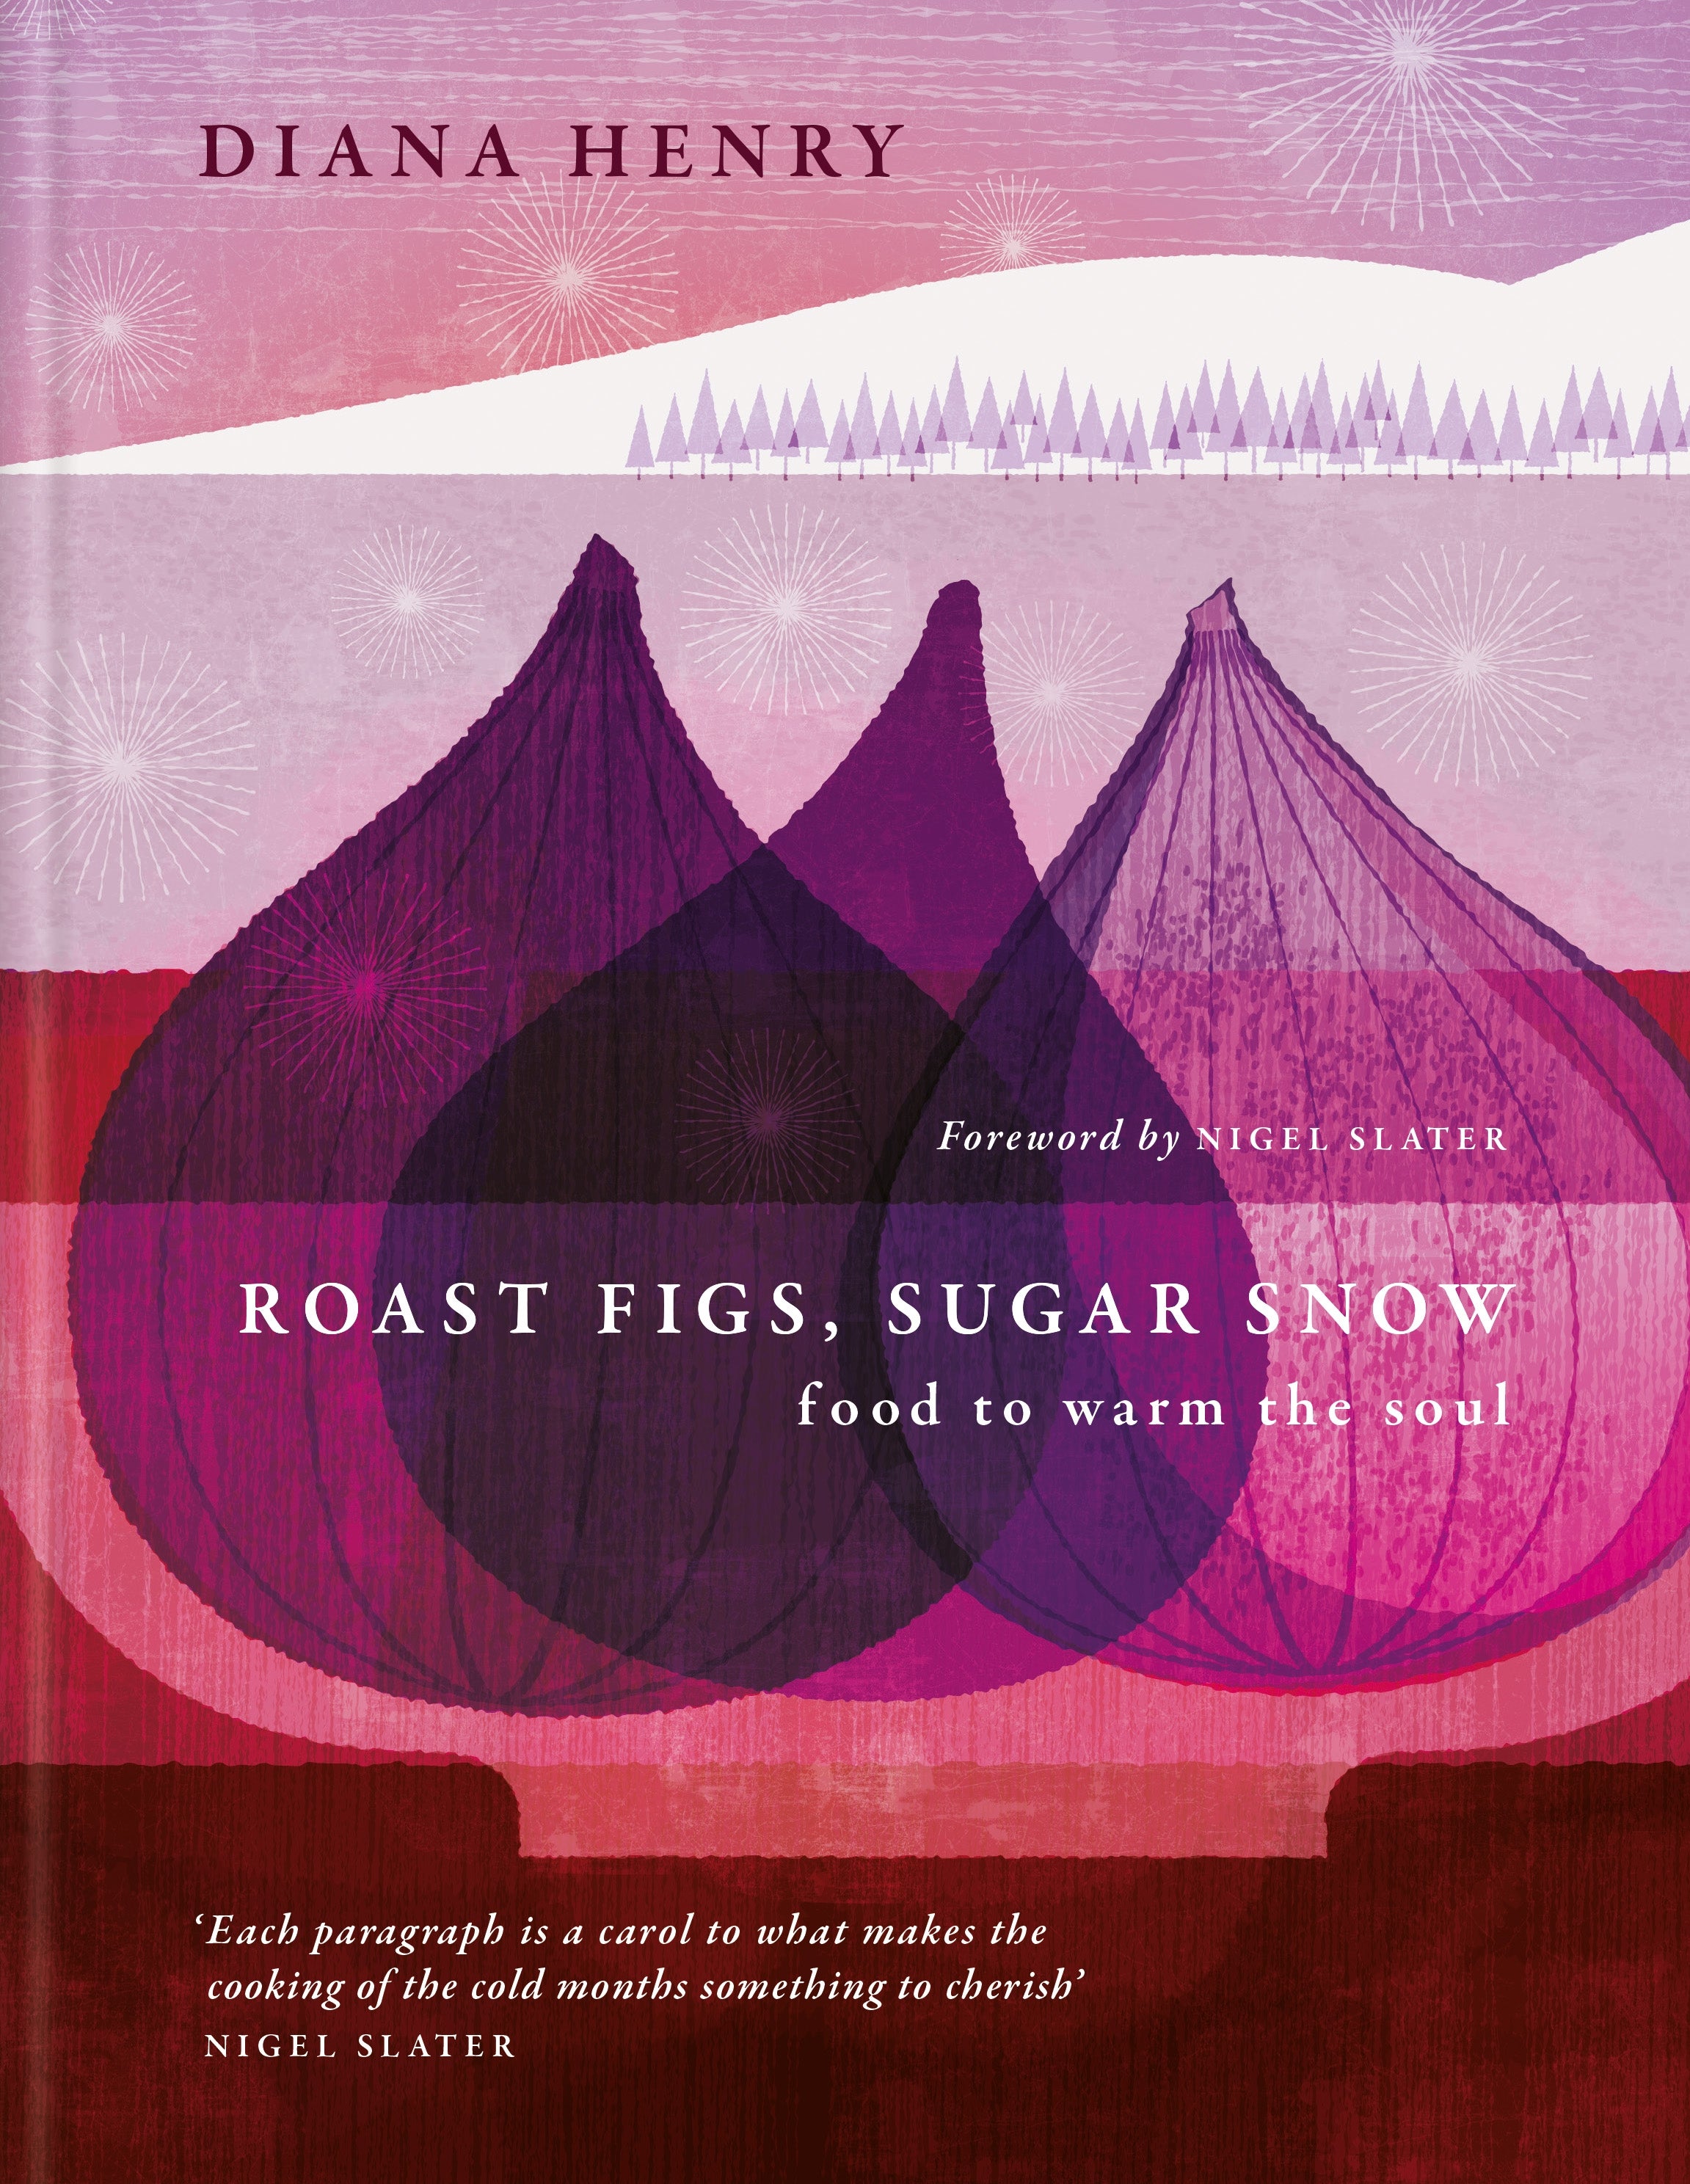 ‘Roast Figs, Sugar Snow’, now reworked, was first published in 2005